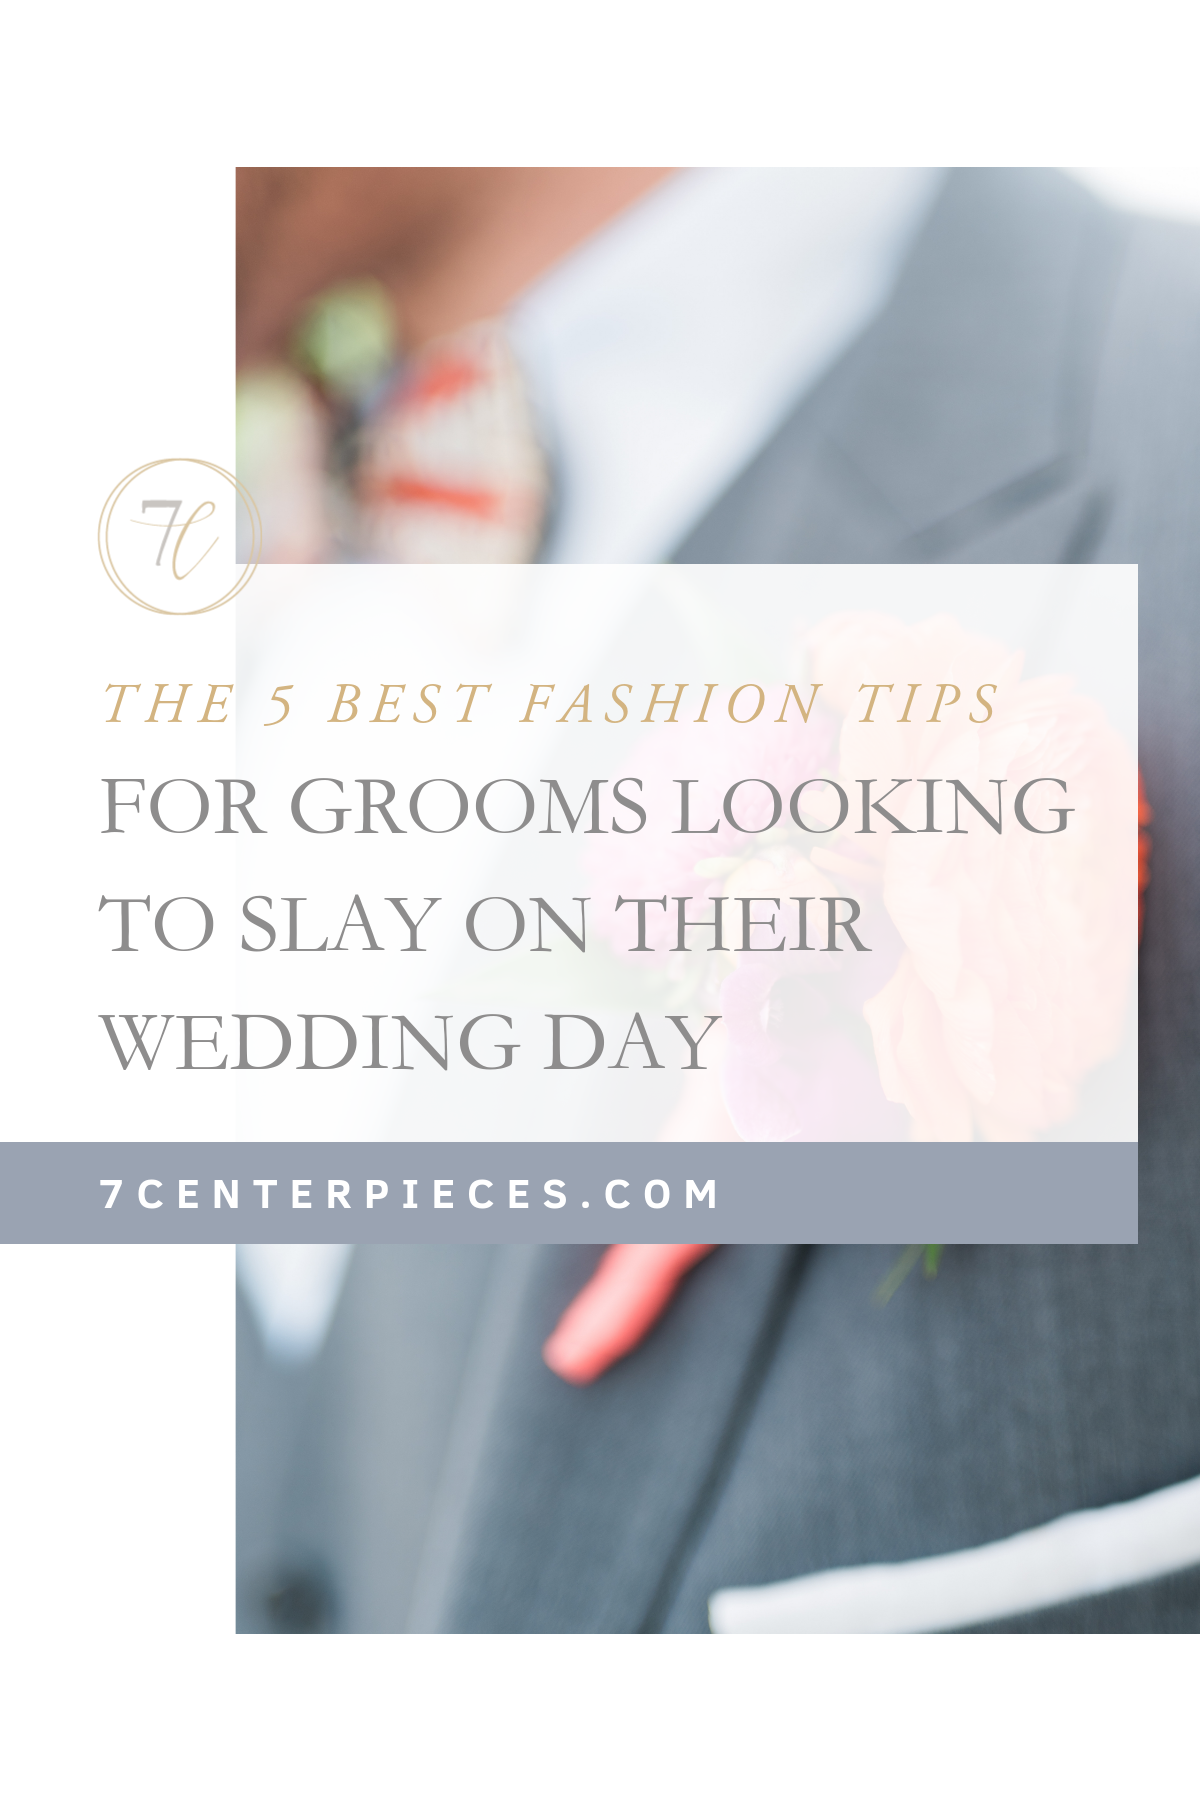 The 5 Best Fashion Tips for Grooms Looking to Slay on their Wedding Day